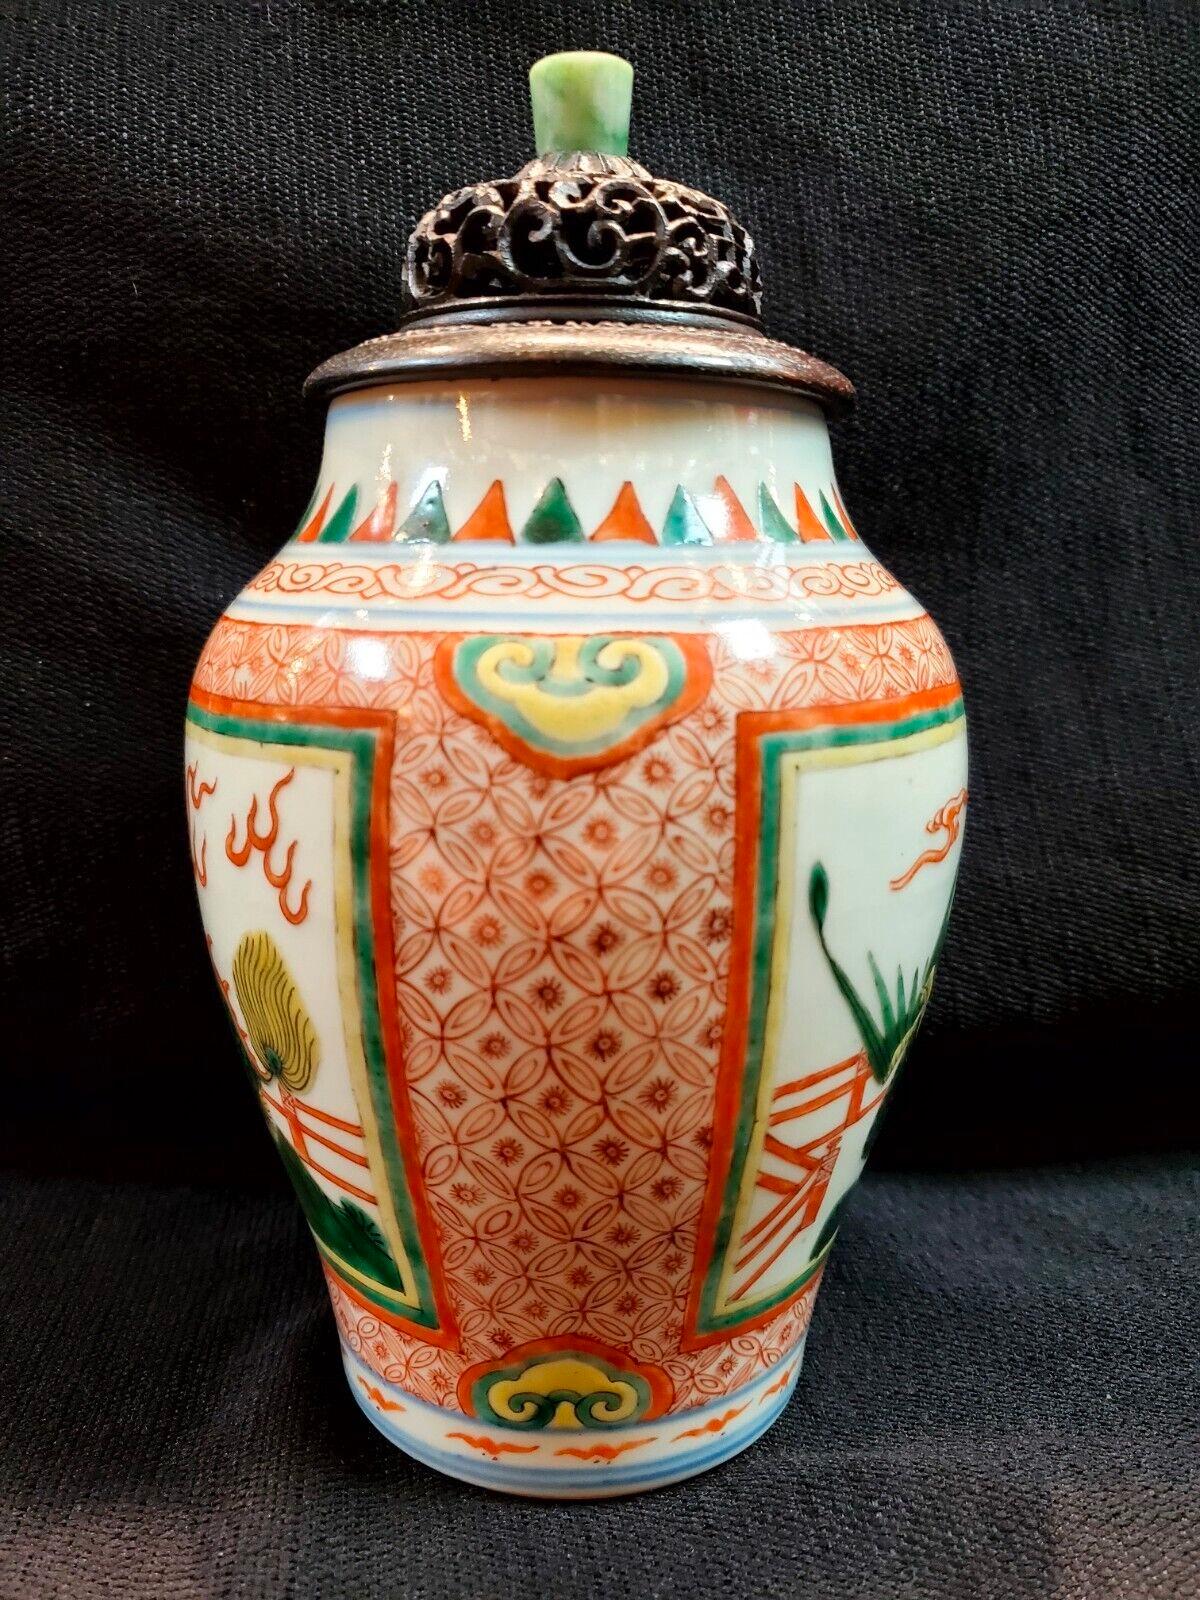 Qing, Chinese antique Kangxi famille verte Qiling covered jar/ ?,?????????? (??).
Condition:As antique shows normal sign of wear and use, no damage or cracks. 
Material:porcelain
Approximate size: H: 8.25 inch, W: 4 inch. Please refer the size in